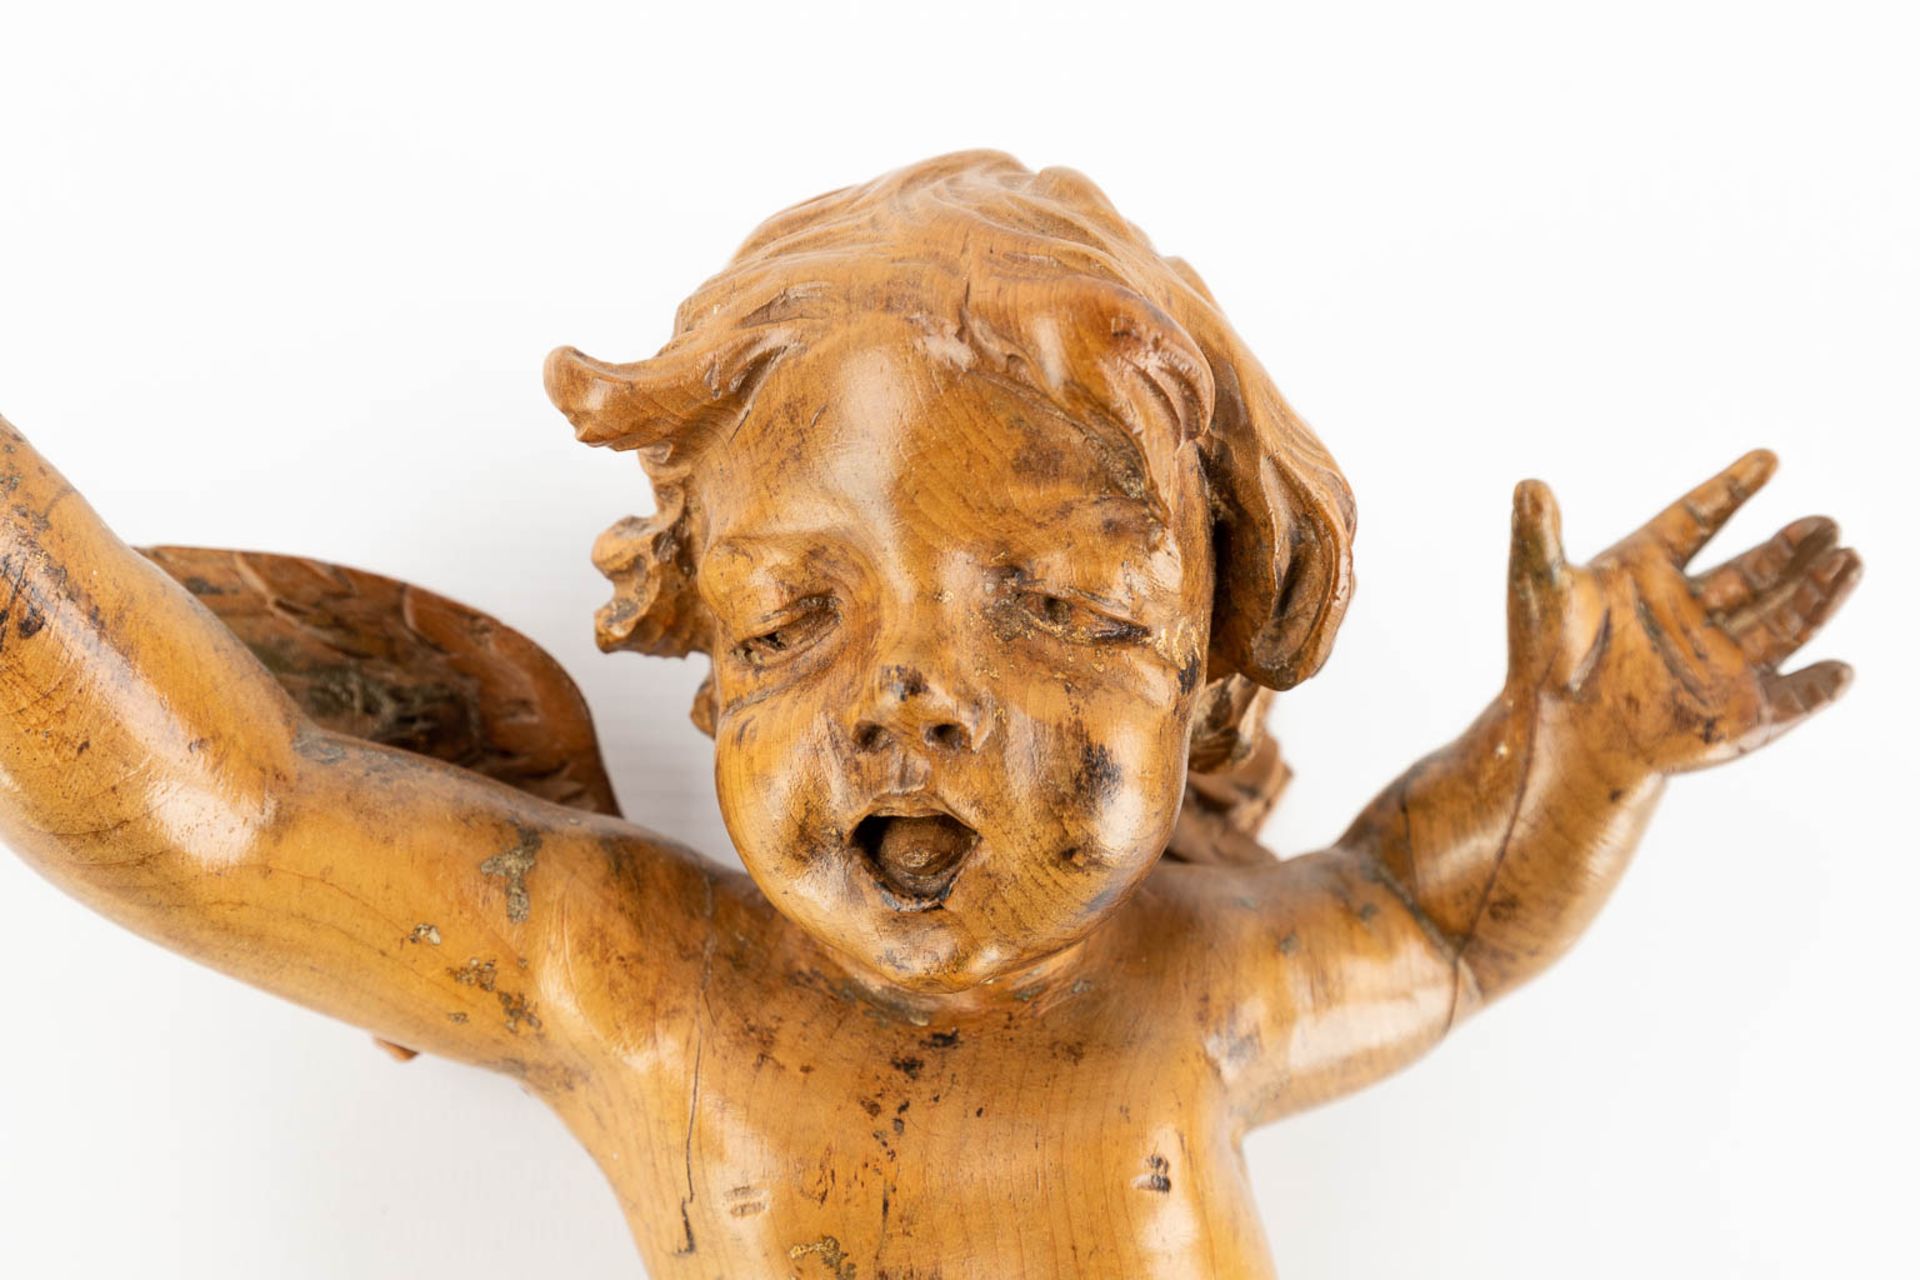 A pair of wood-sculptured putti, basswood, 18th C. (W:22 x H:30 cm) - Image 4 of 14